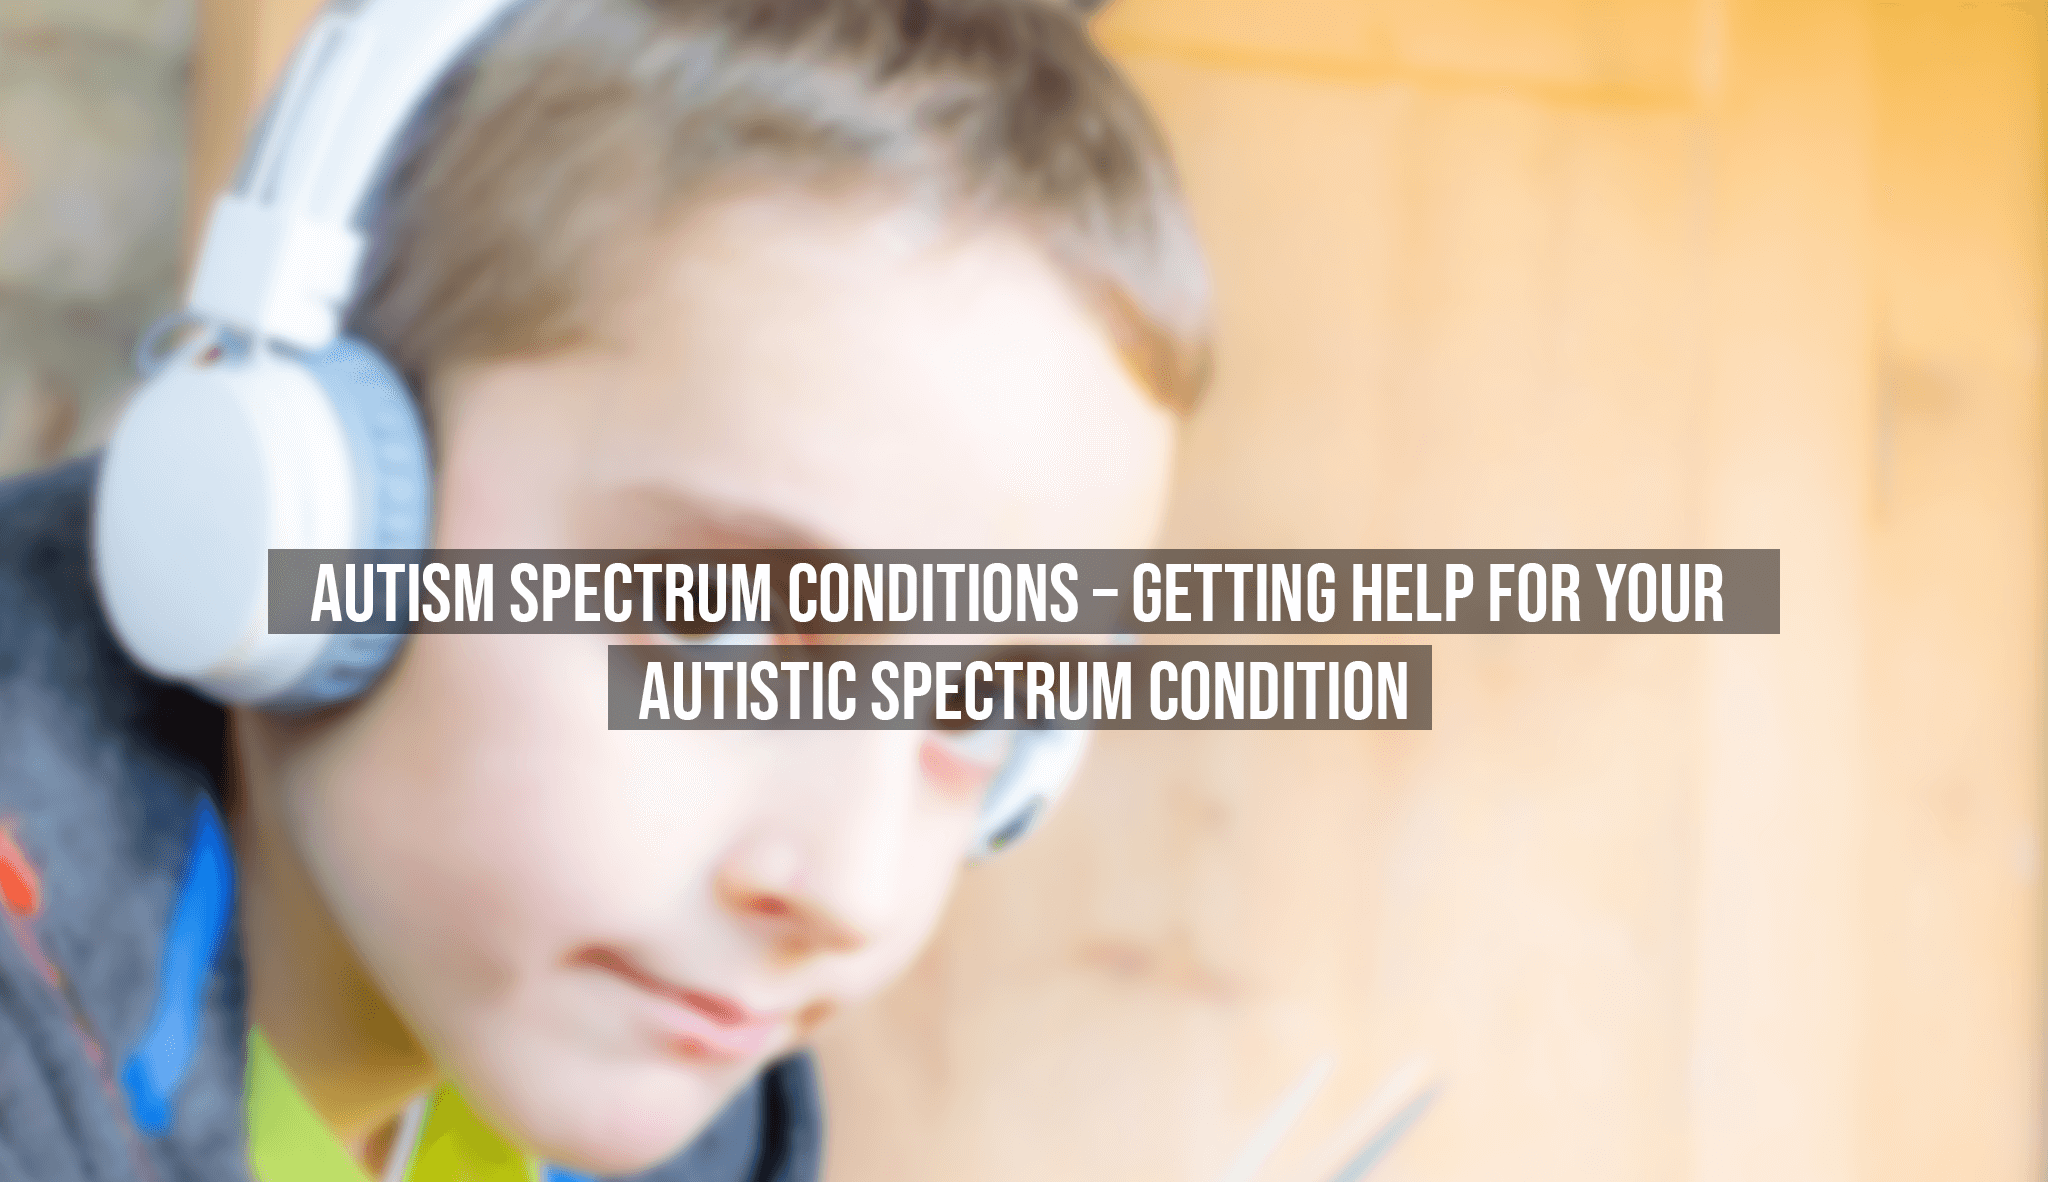 Autism Spectrum Conditions - Getting Help For Your Autistic Spectrum Condition